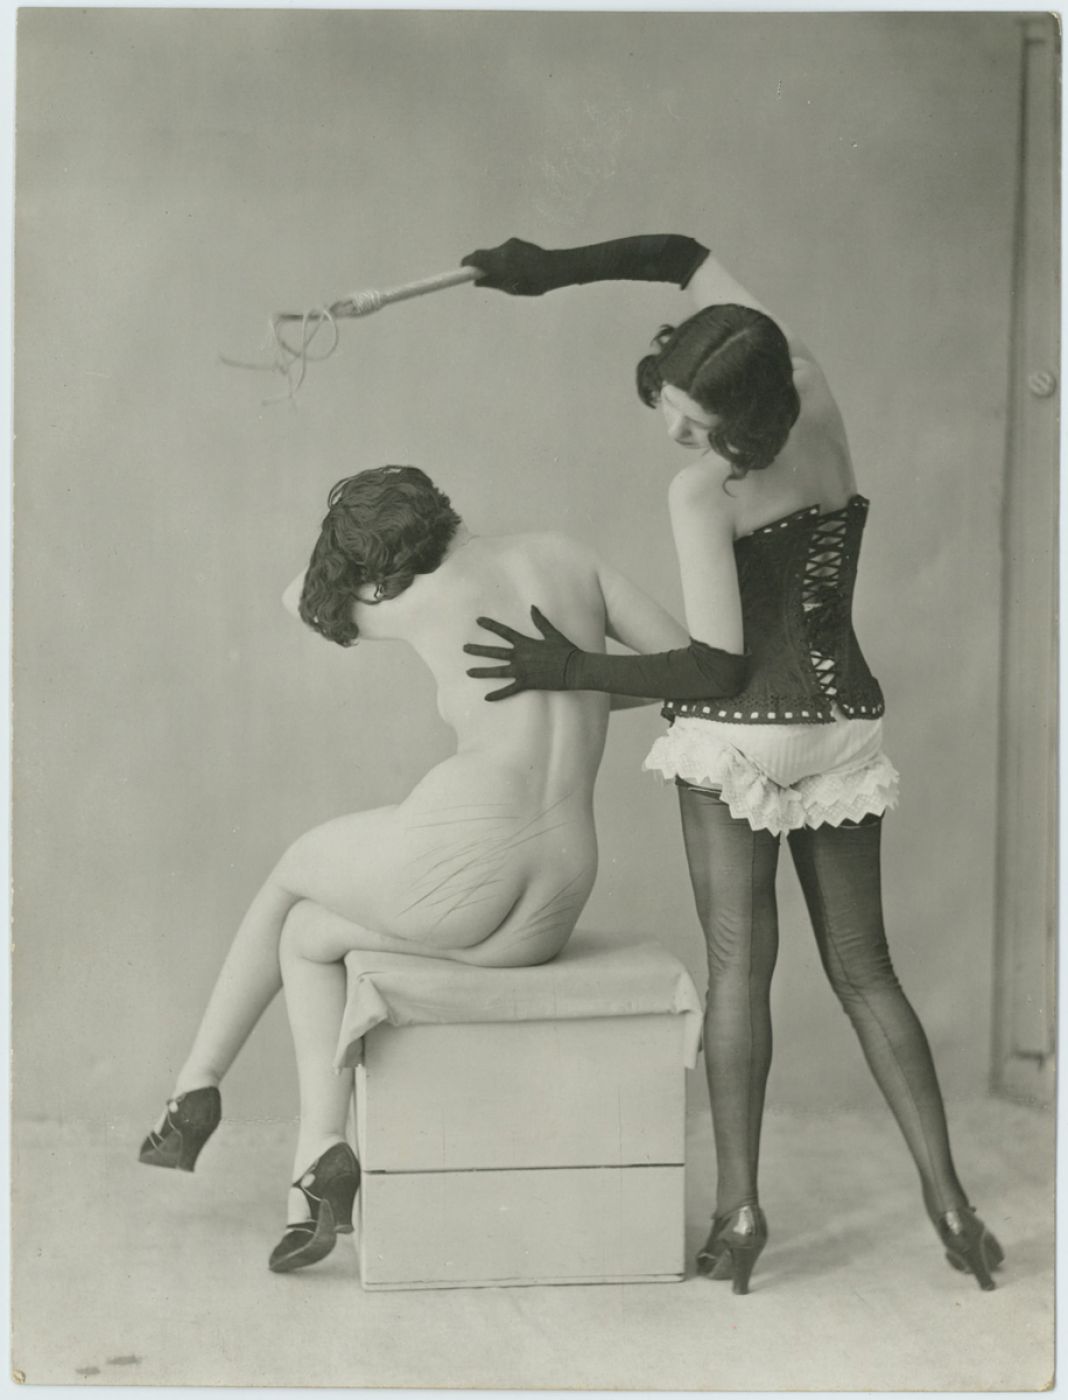 Studio Biederer, “Untitled (The whipping)”, 1925 ca.